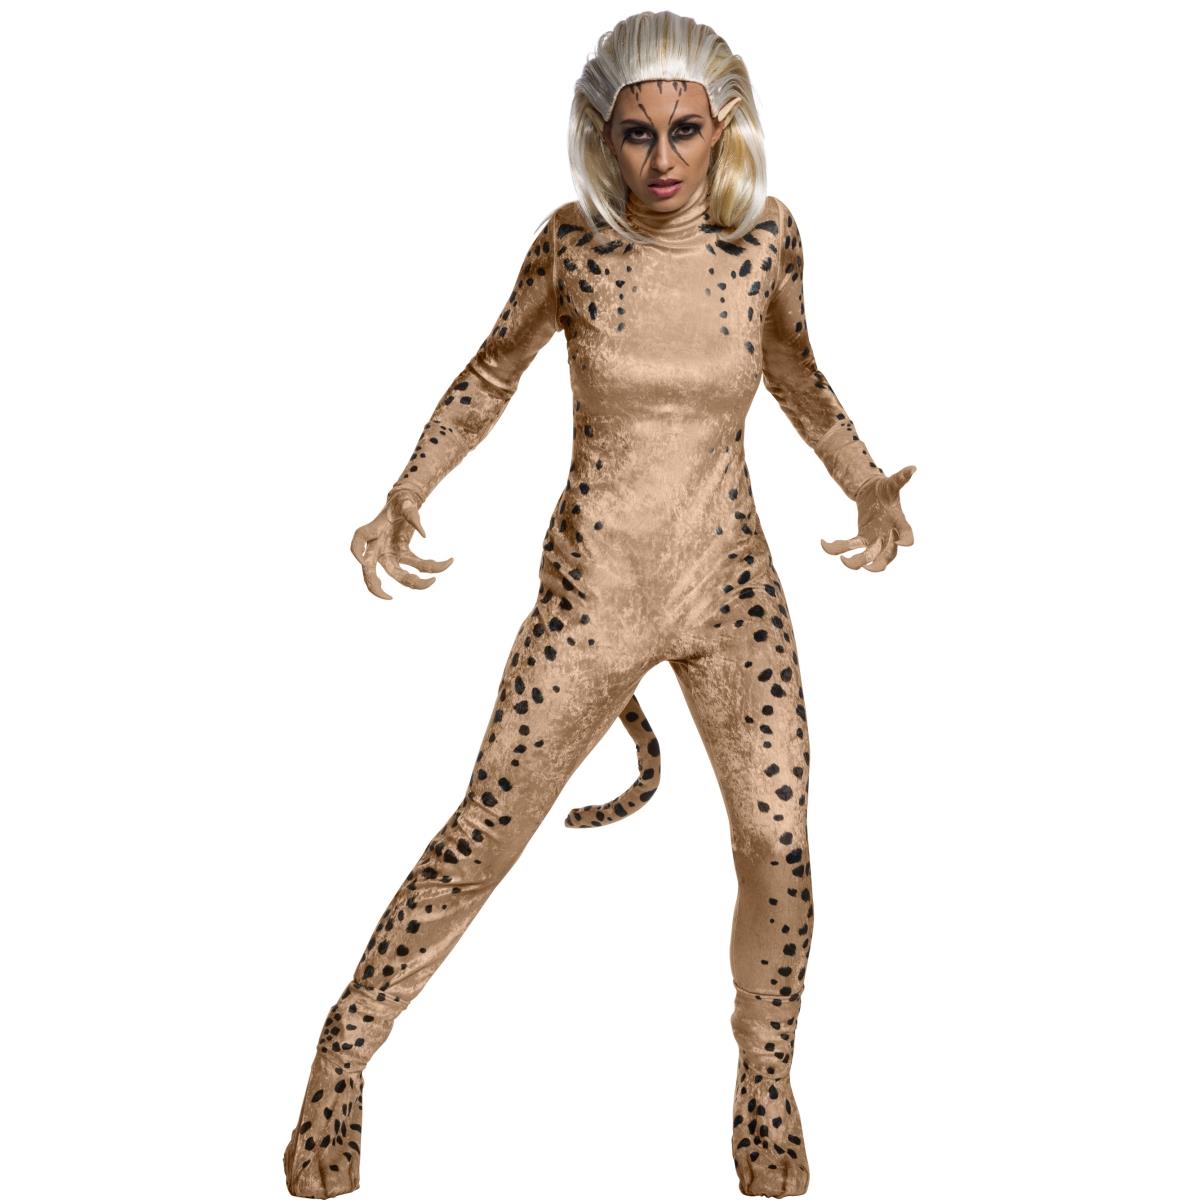 Picture of Rubies 643143 WW2 Movie Cheetah Deluxe Adult Costume - Large